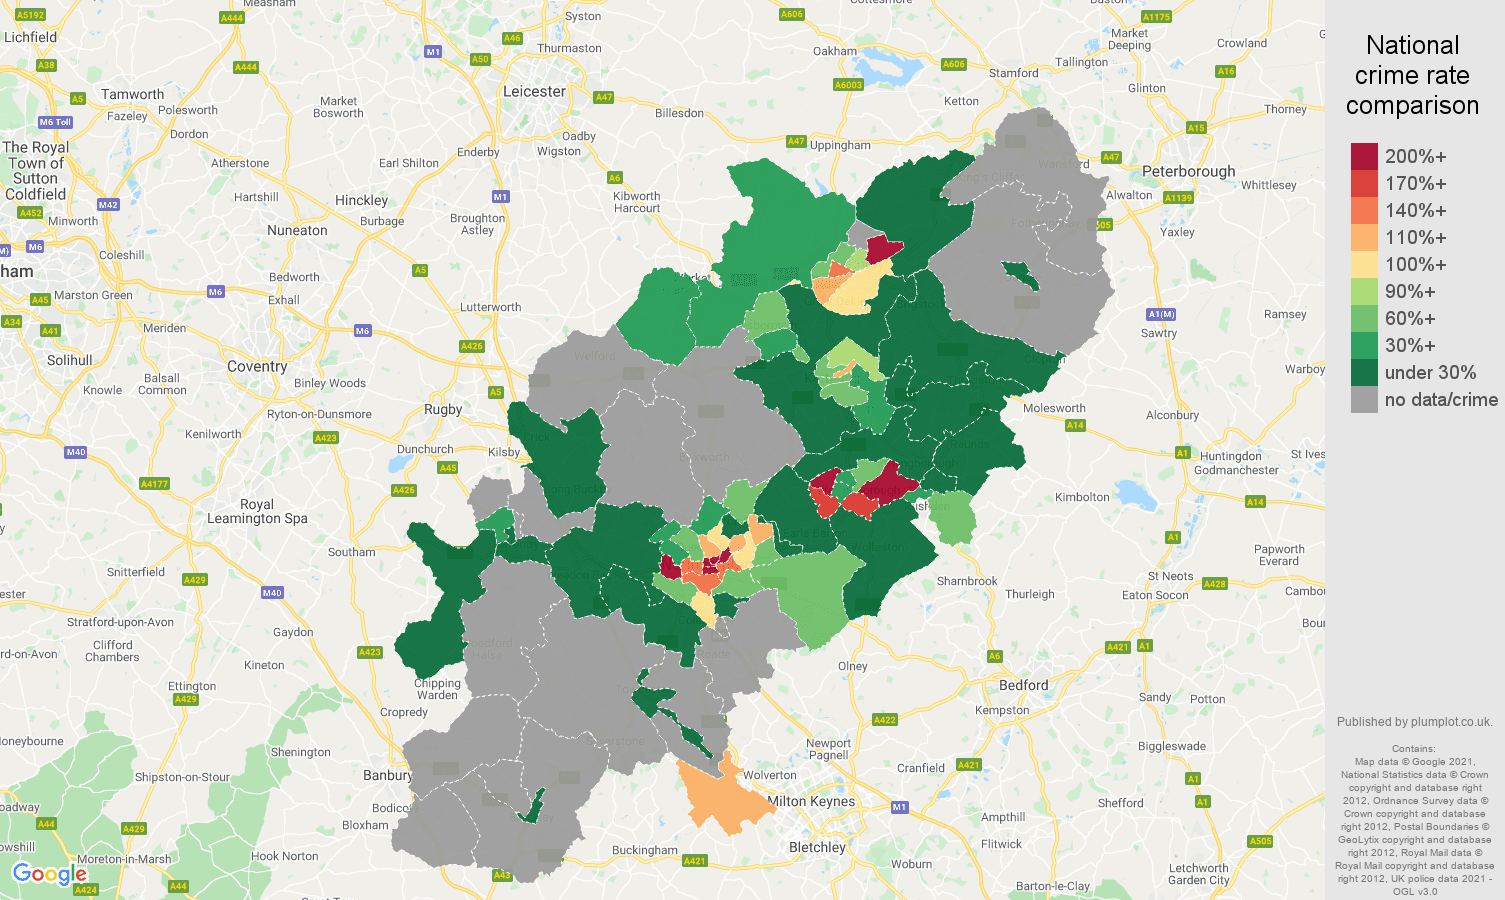 Northamptonshire bicycle theft crime rate comparison map